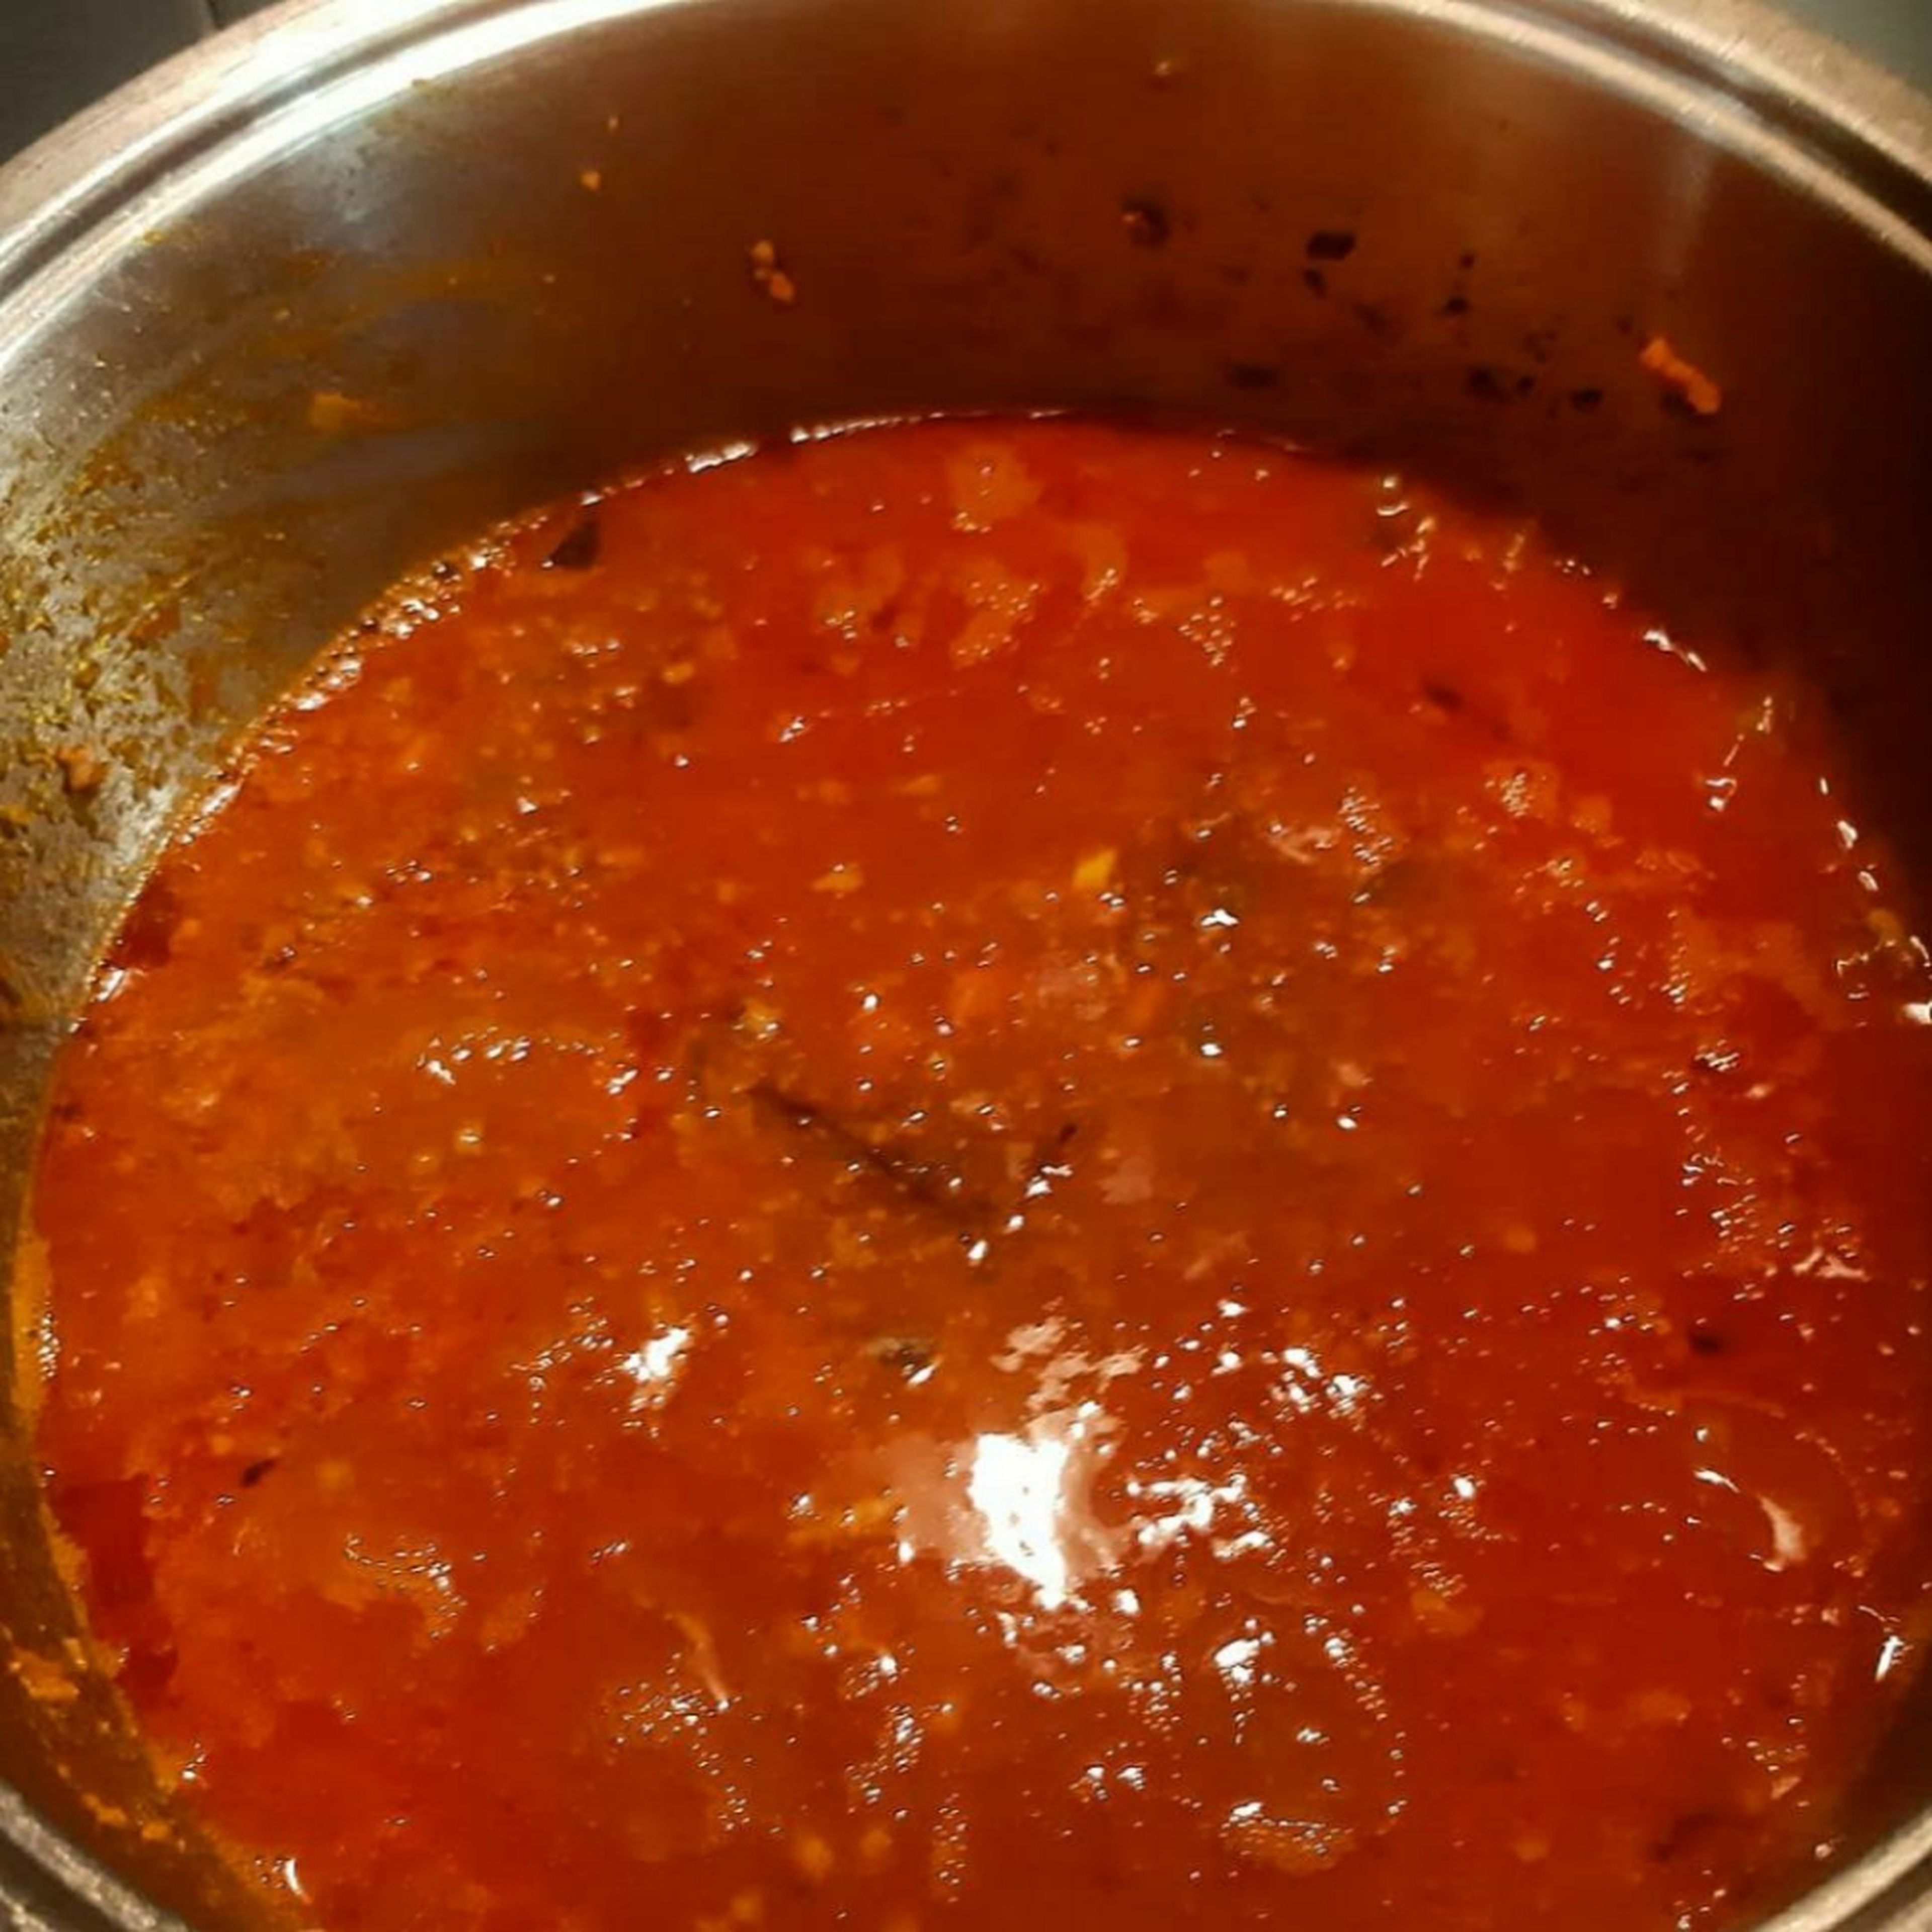 It's now time to add the broth, all at once and leave the sauce cook for at least 3hrs, making sure it doesn't stick to the bottom of the pot. If it dries too much you can add more water. Taste and add salt if necessary.